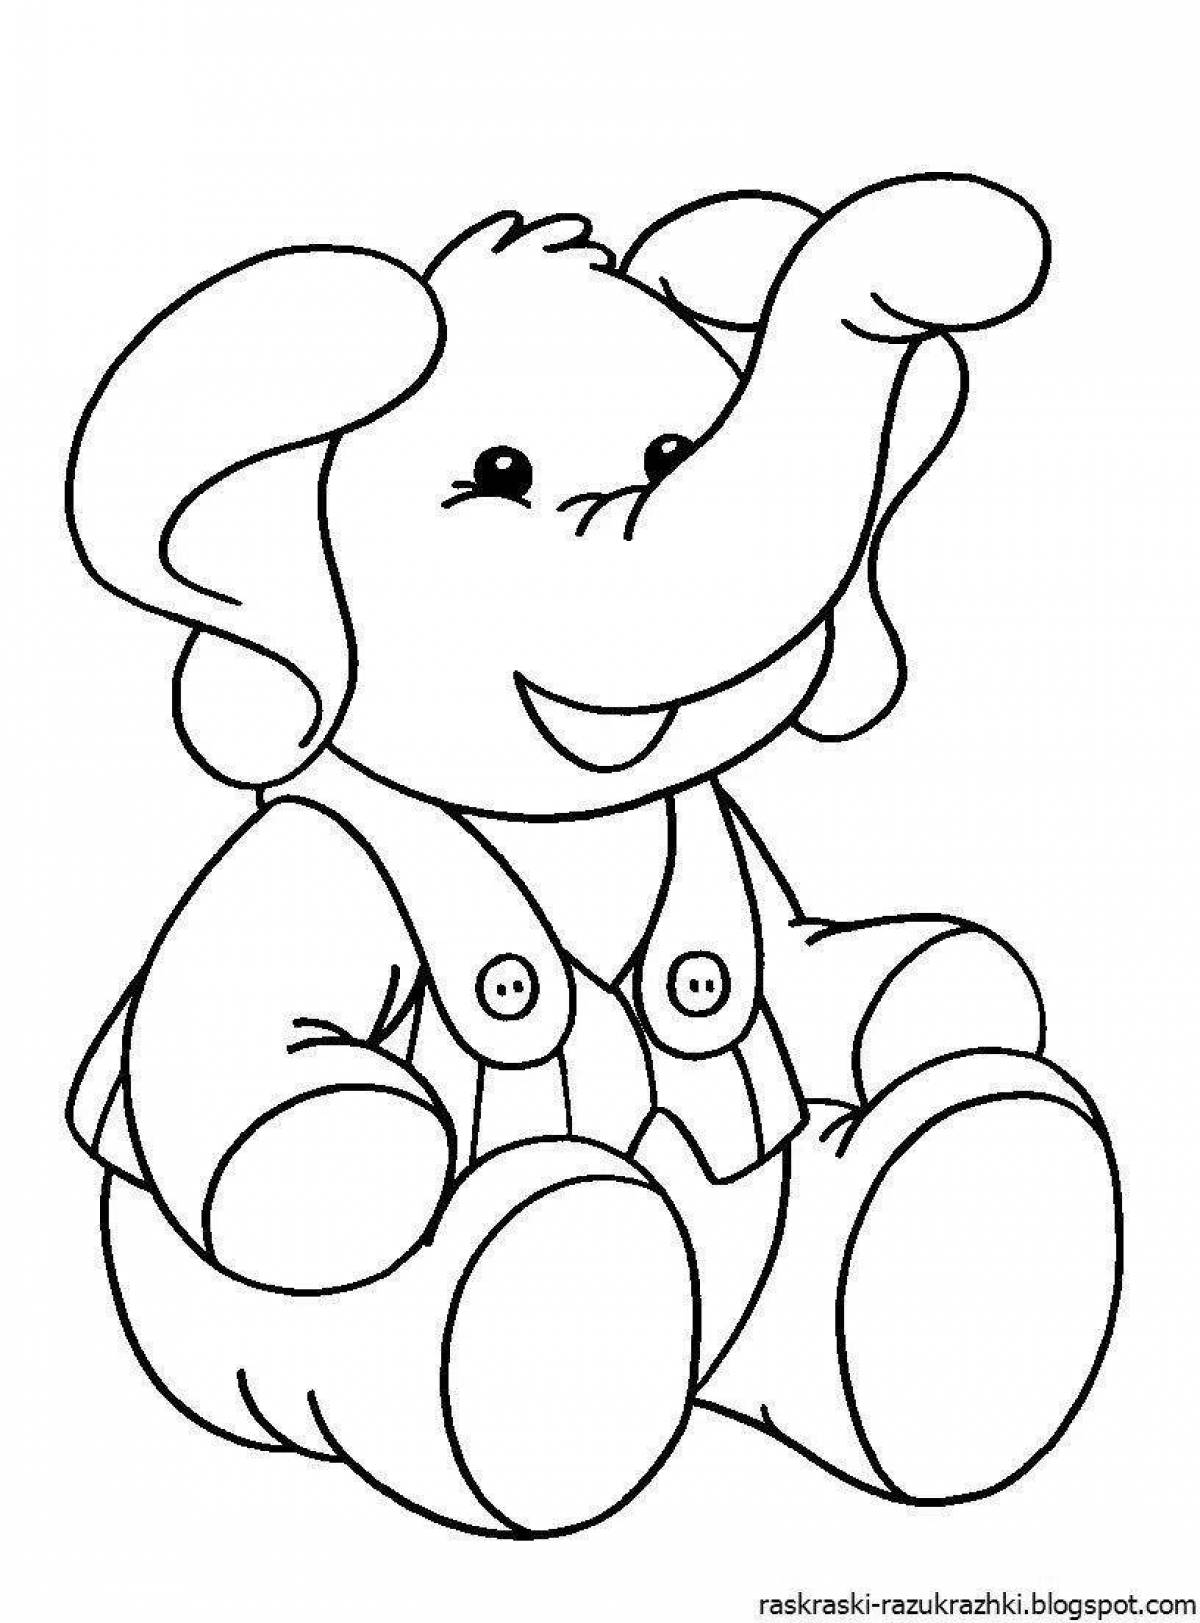 Coloring pages for kids for kids #15